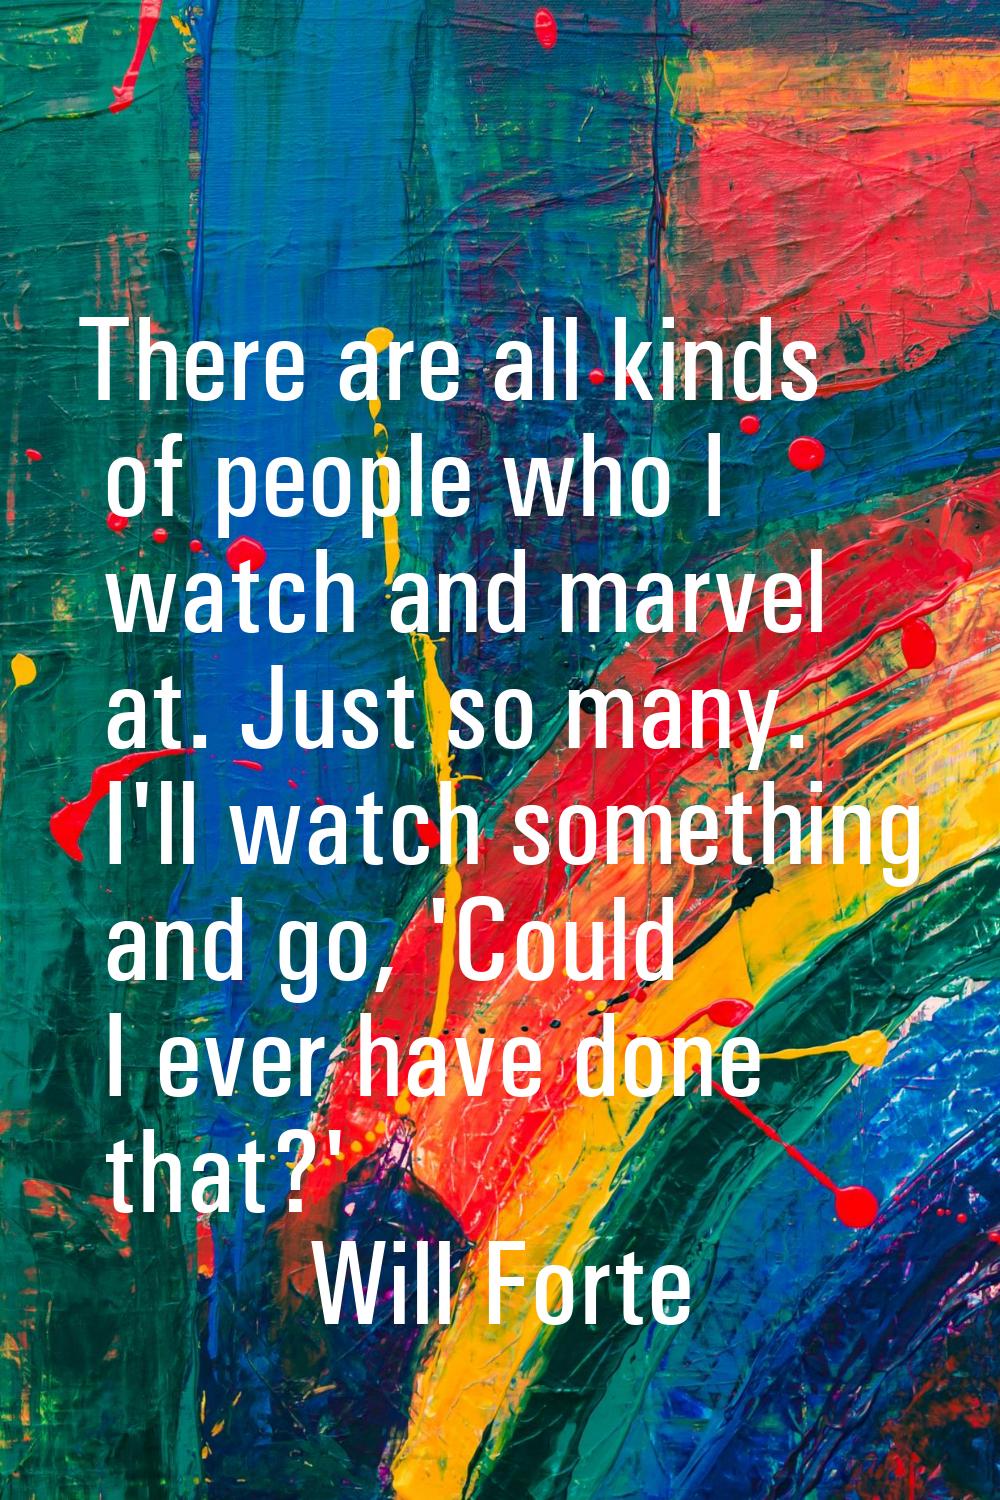 There are all kinds of people who I watch and marvel at. Just so many. I'll watch something and go,